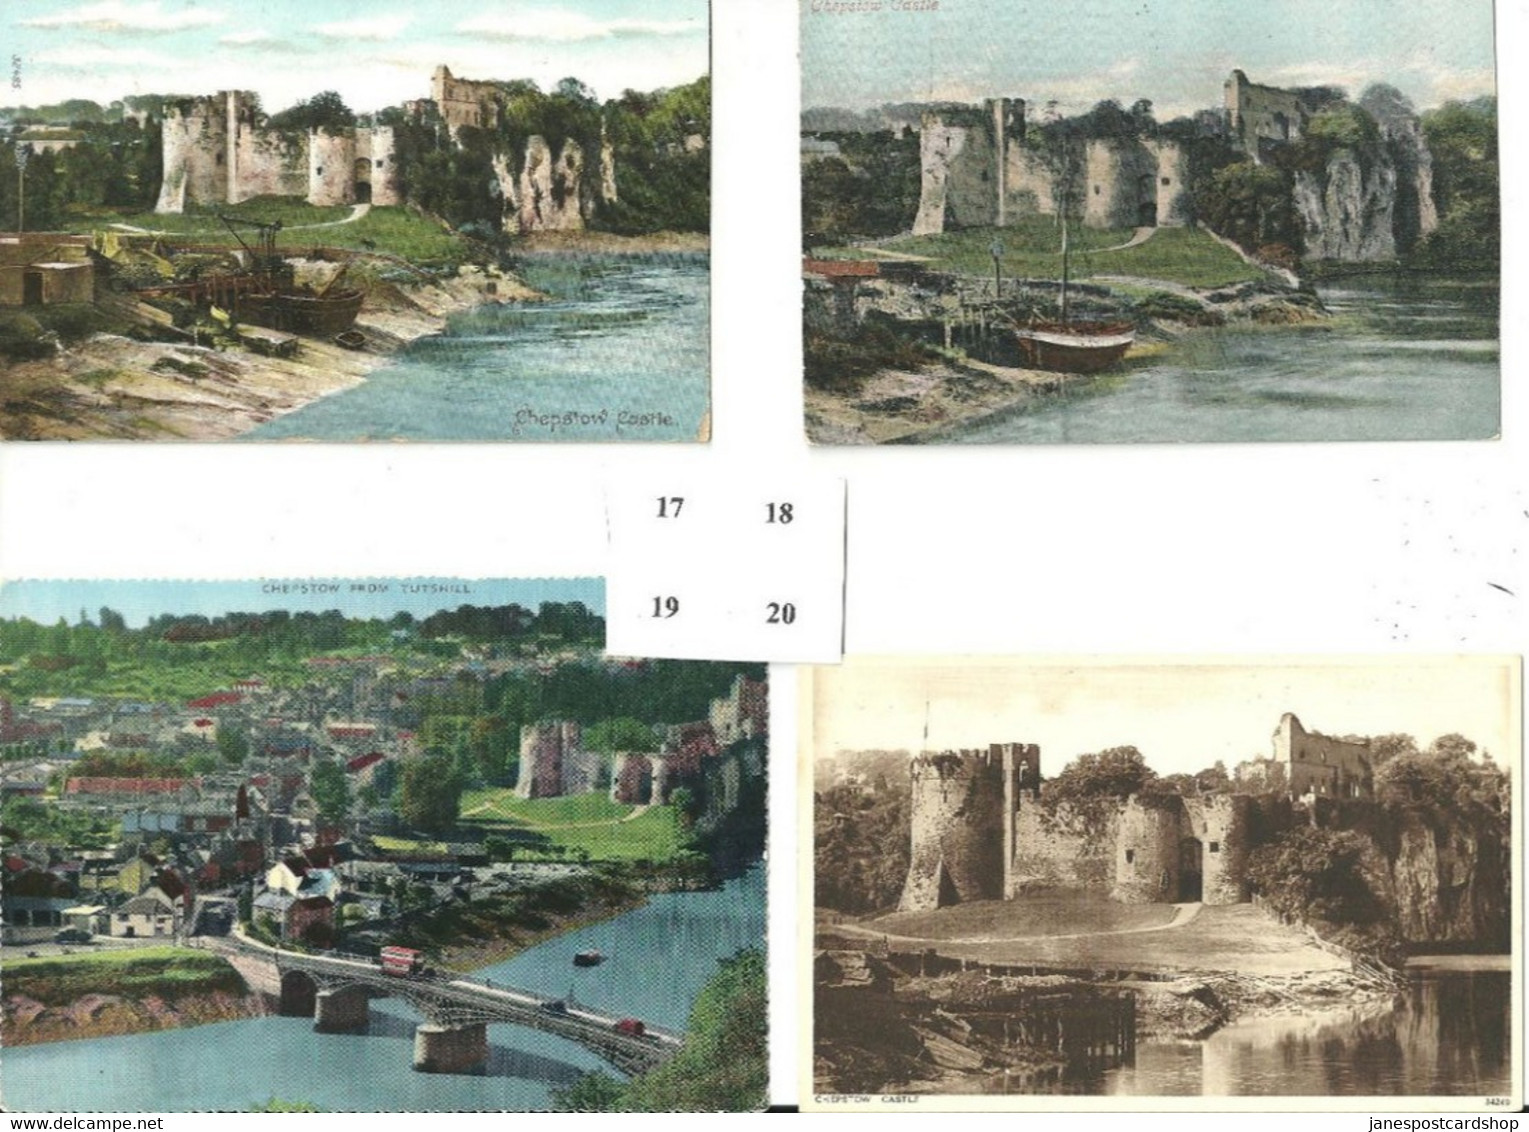 FOUR POSTCARDS - CHEPSTOW CASTLE - COLOURED AND SEPIA - Montgomeryshire